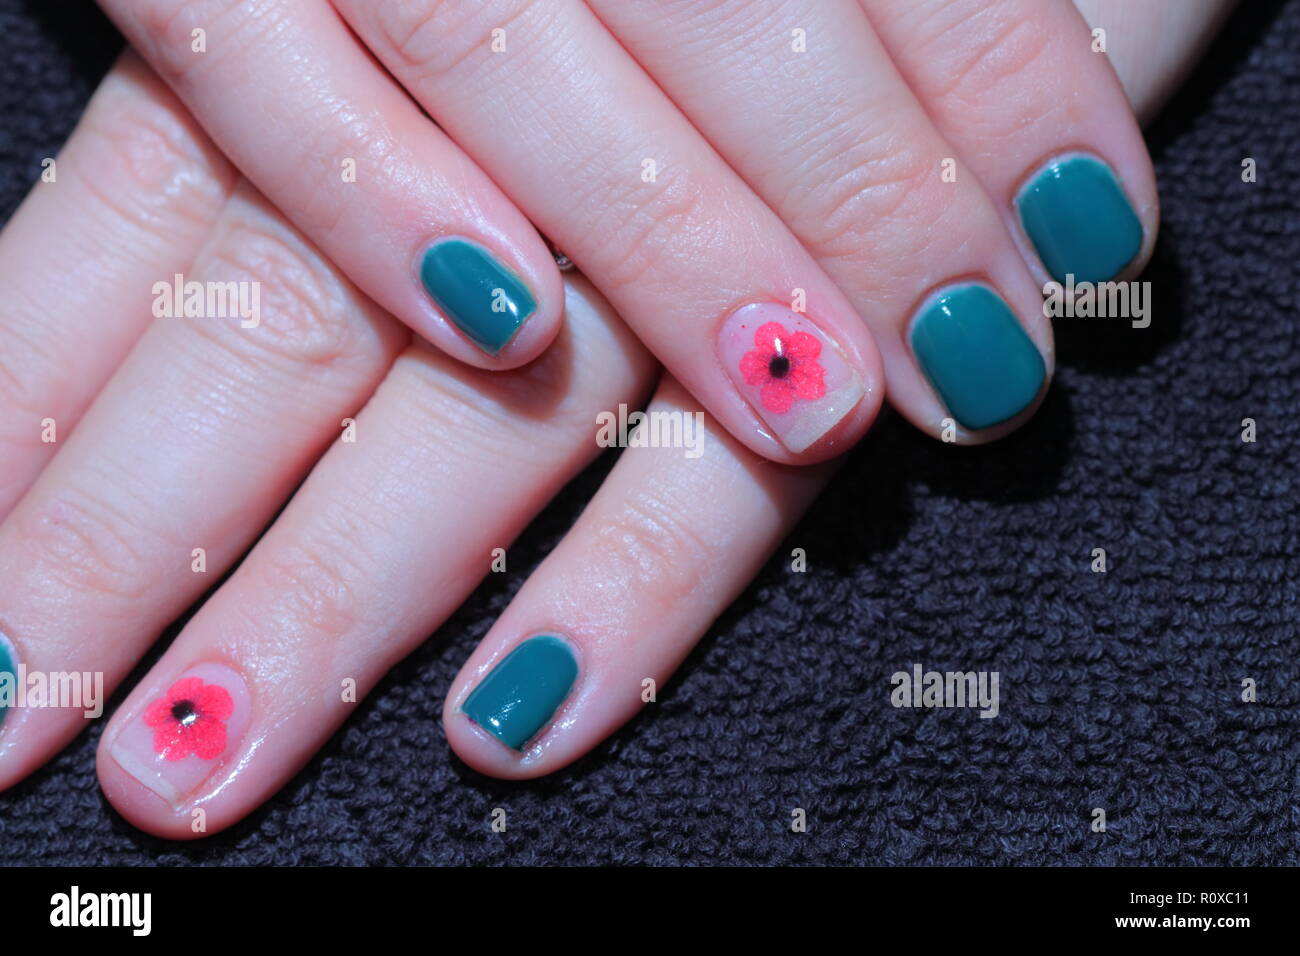 Finished gel polish on finger nails with a poppy to mark remembrance day. Stock Photo